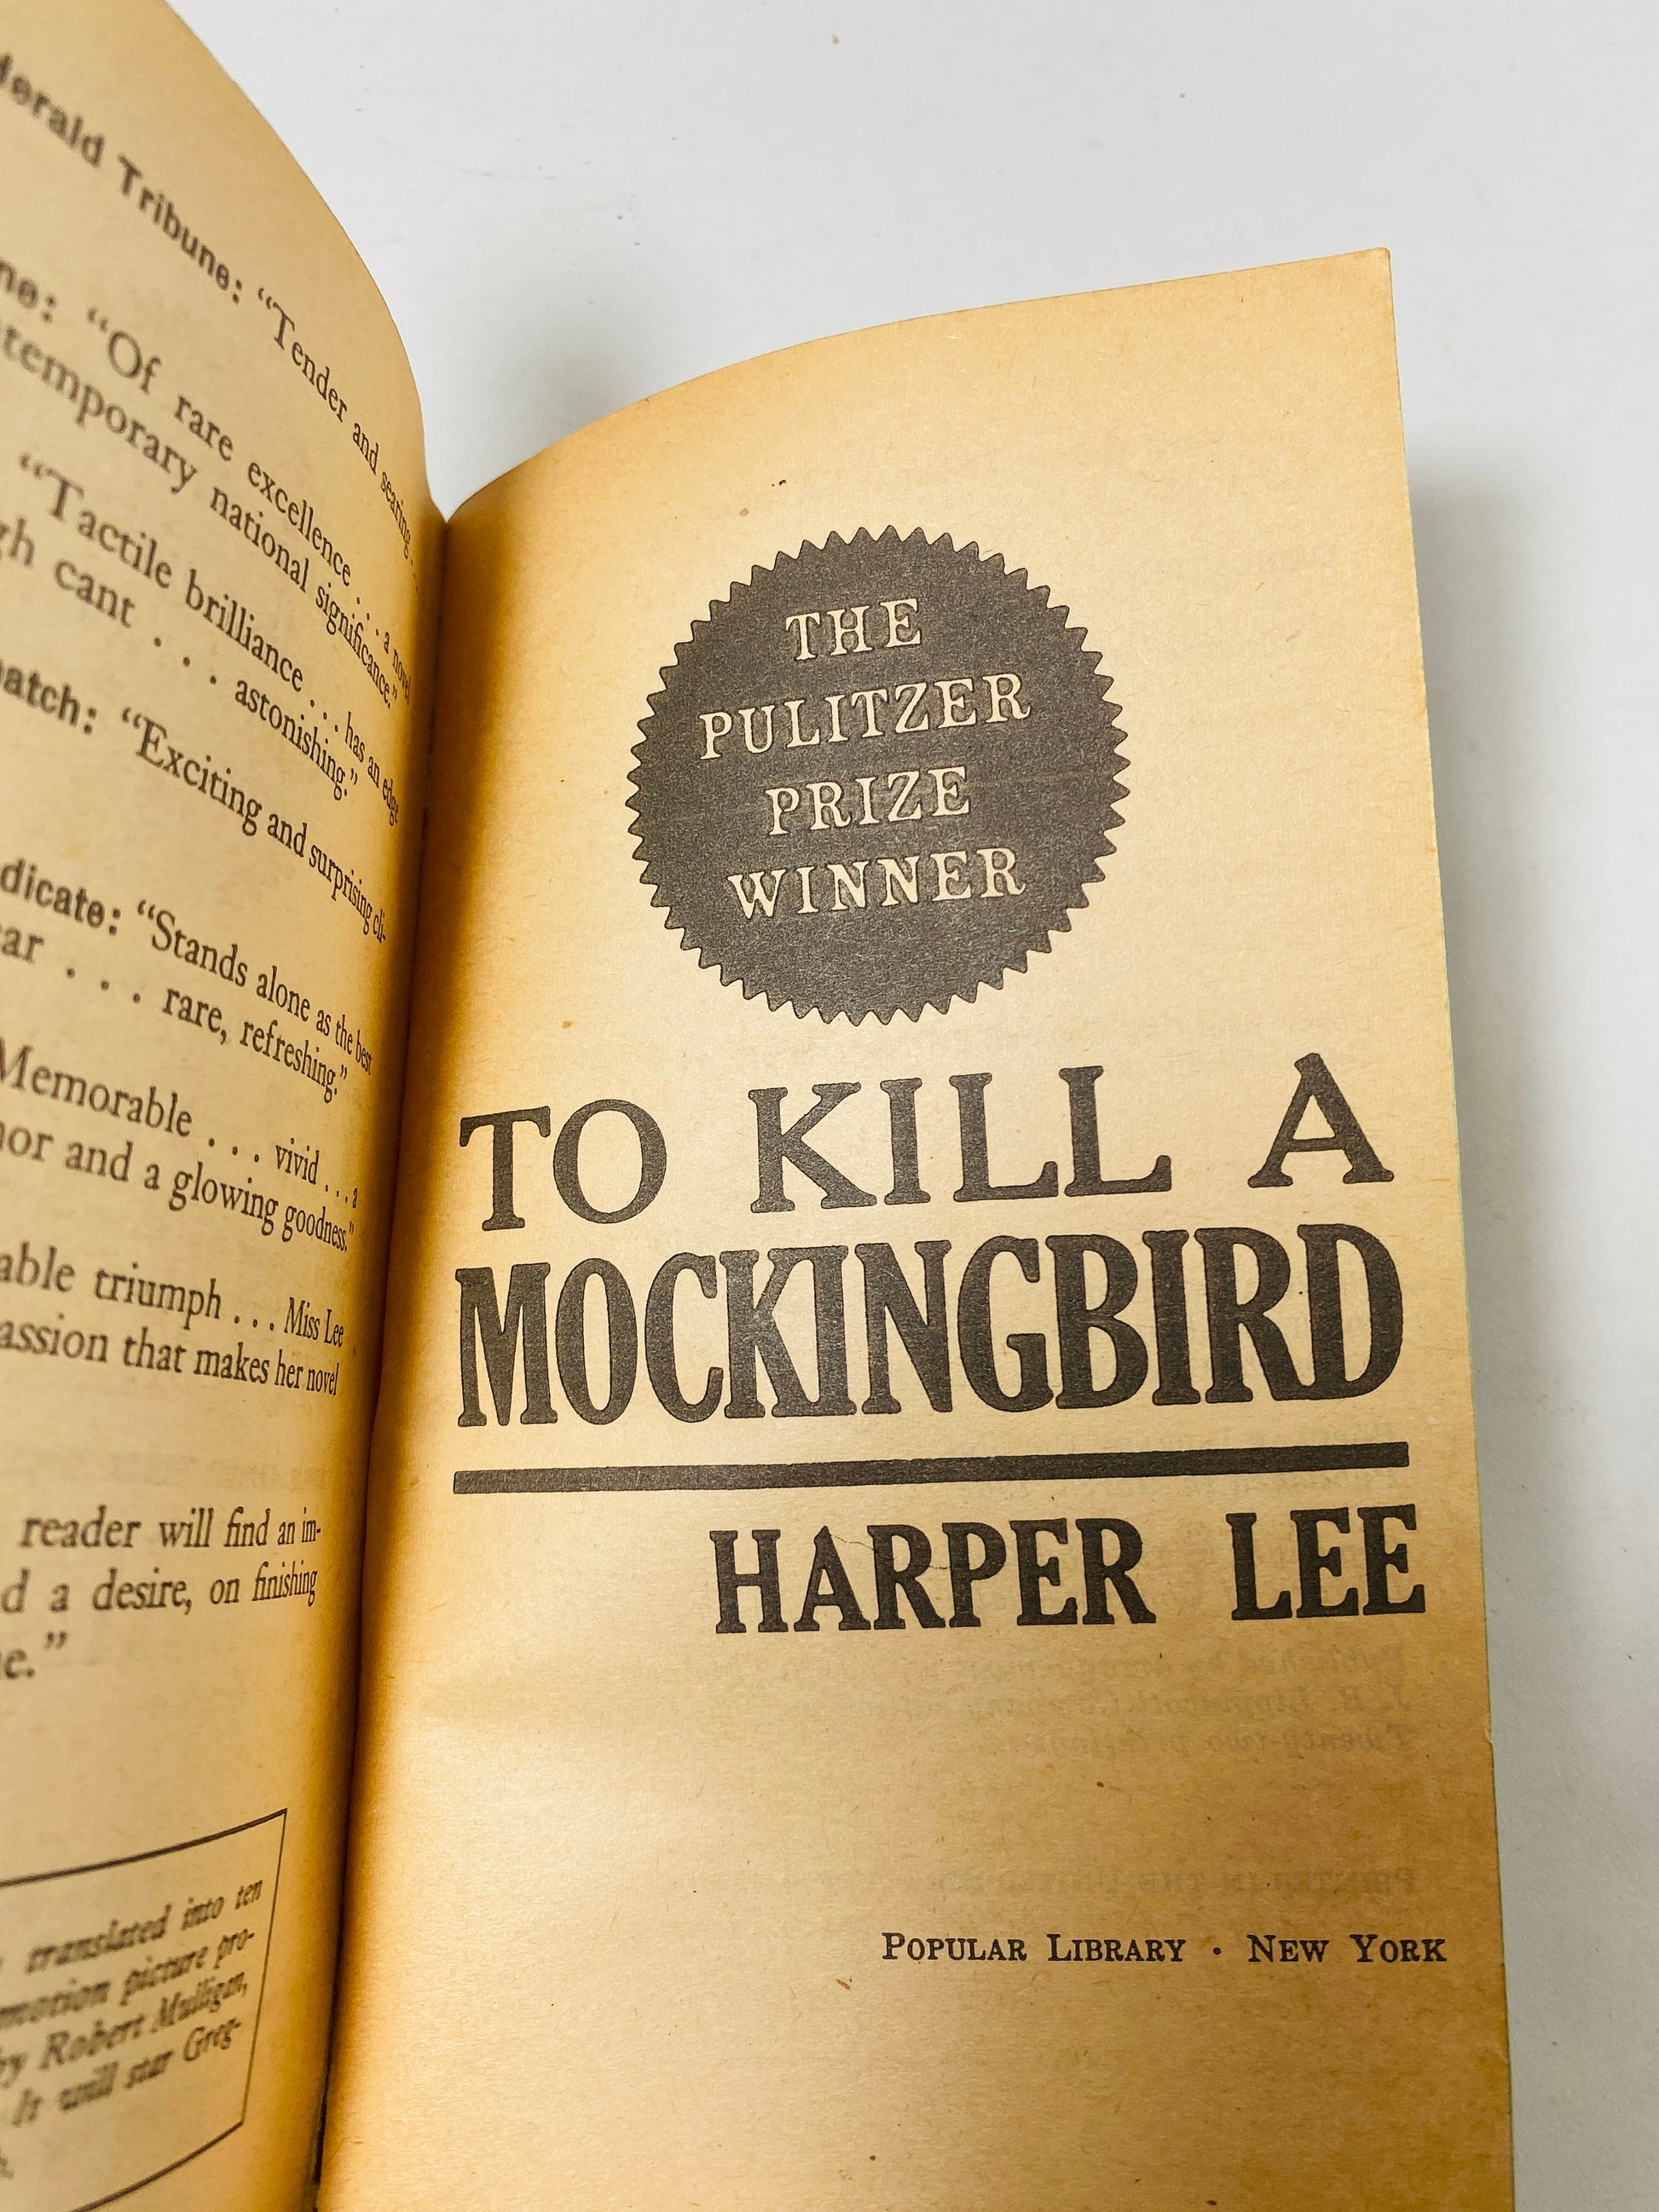 1962 To Kill a Mockingbird Book by Harper Lee vintage paperback book American classic reading 100 Best Novels Pulitzer Prize